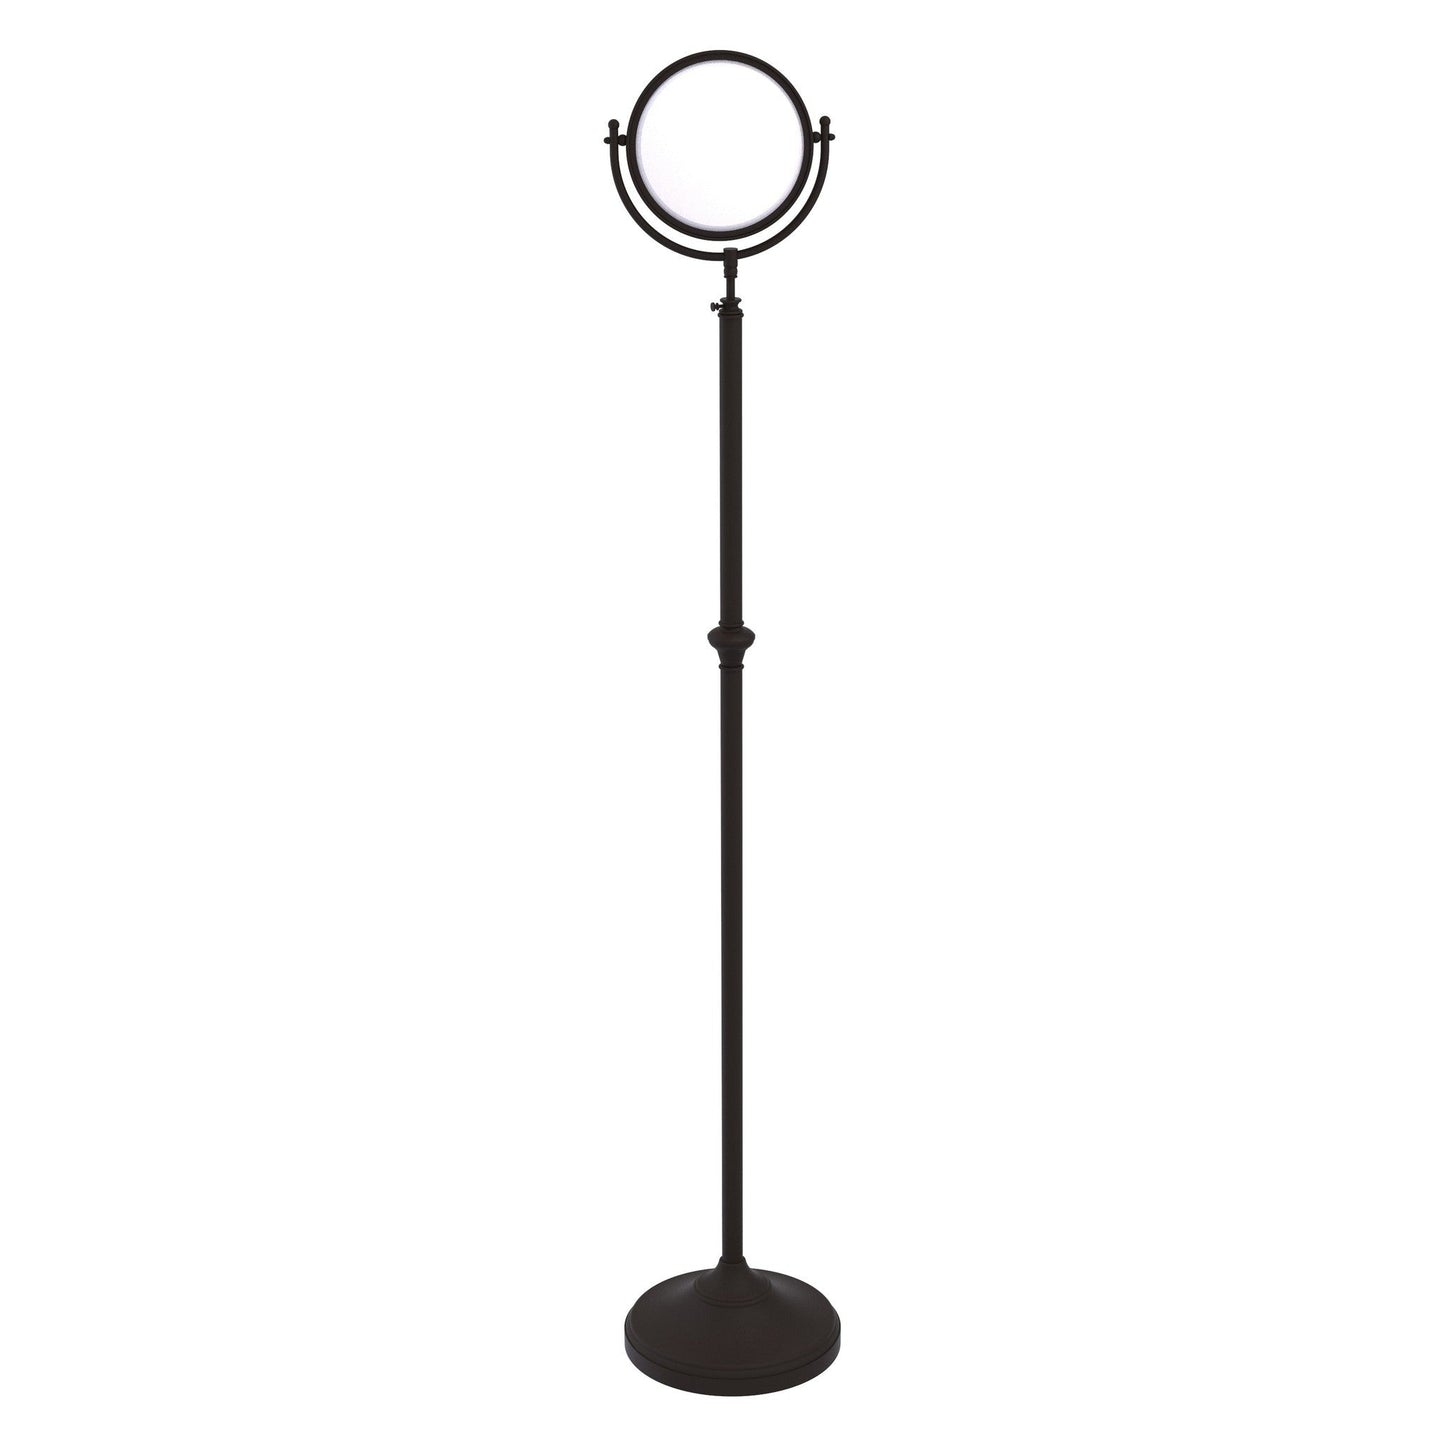 Allied Brass DMF-2/3X 10.5" x 10.5" Oil Rubbed Bronze Solid Brass Adjustable Height Floor Standing Make-Up Mirror With 3X Magnification